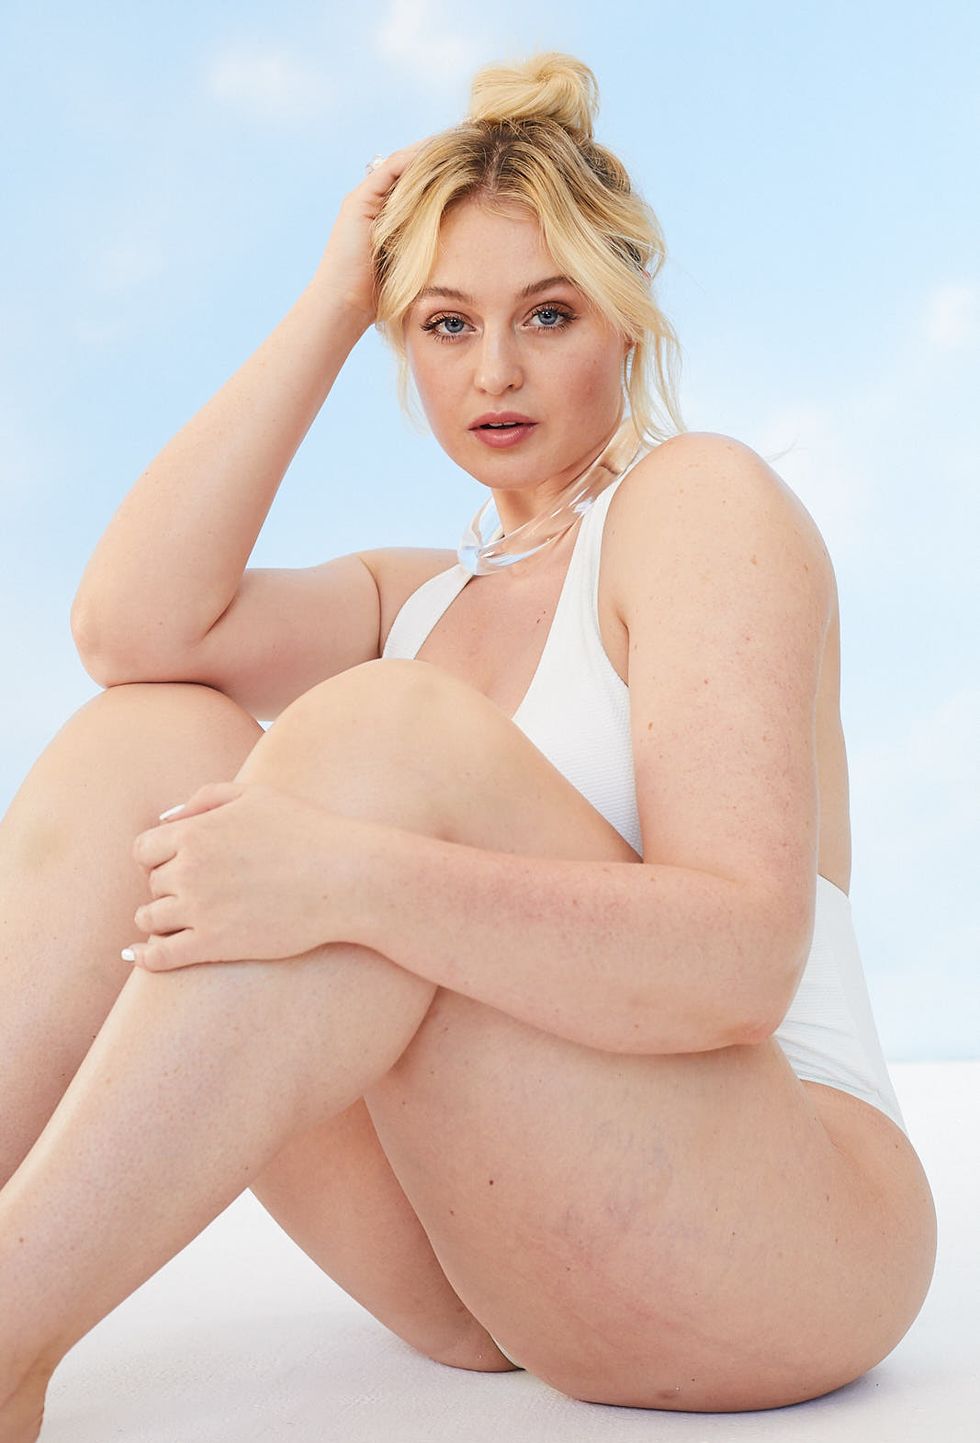 Ishkra Lawrence Hd Naked - Iskra Lawrence Has Redefined Her Insecuritiesâ€”And She Wants You To Do The  Same